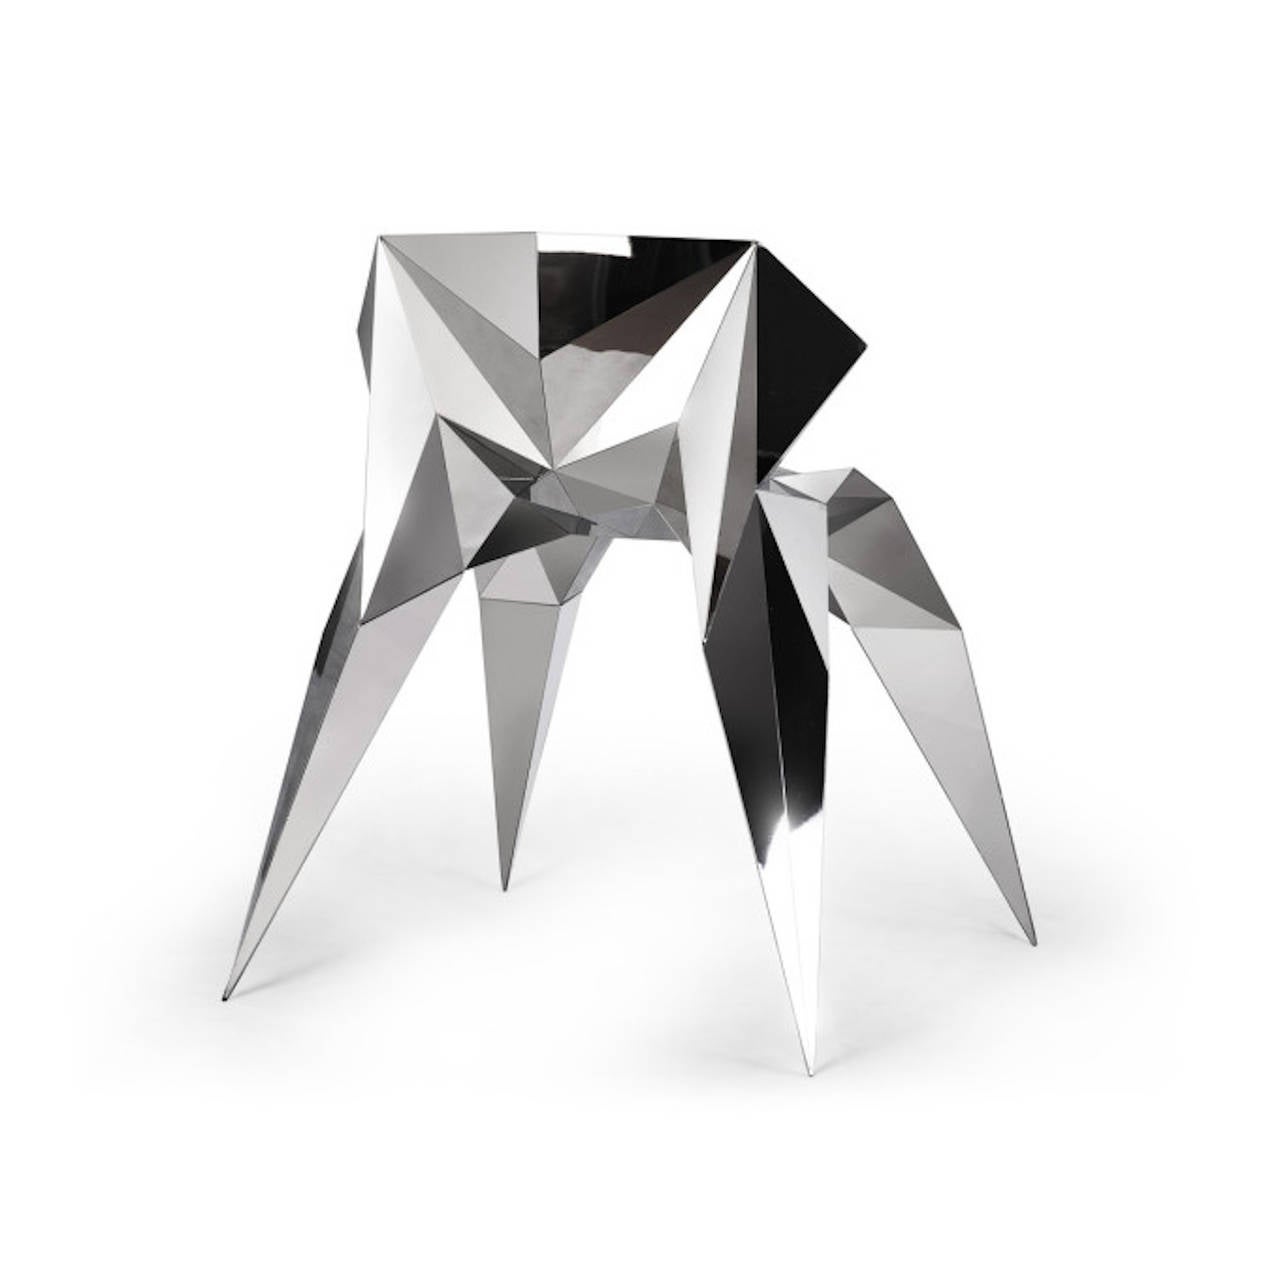 Chinese Heart Chair with Mirror Finish Stainless Steel by Zhoujie Zhang